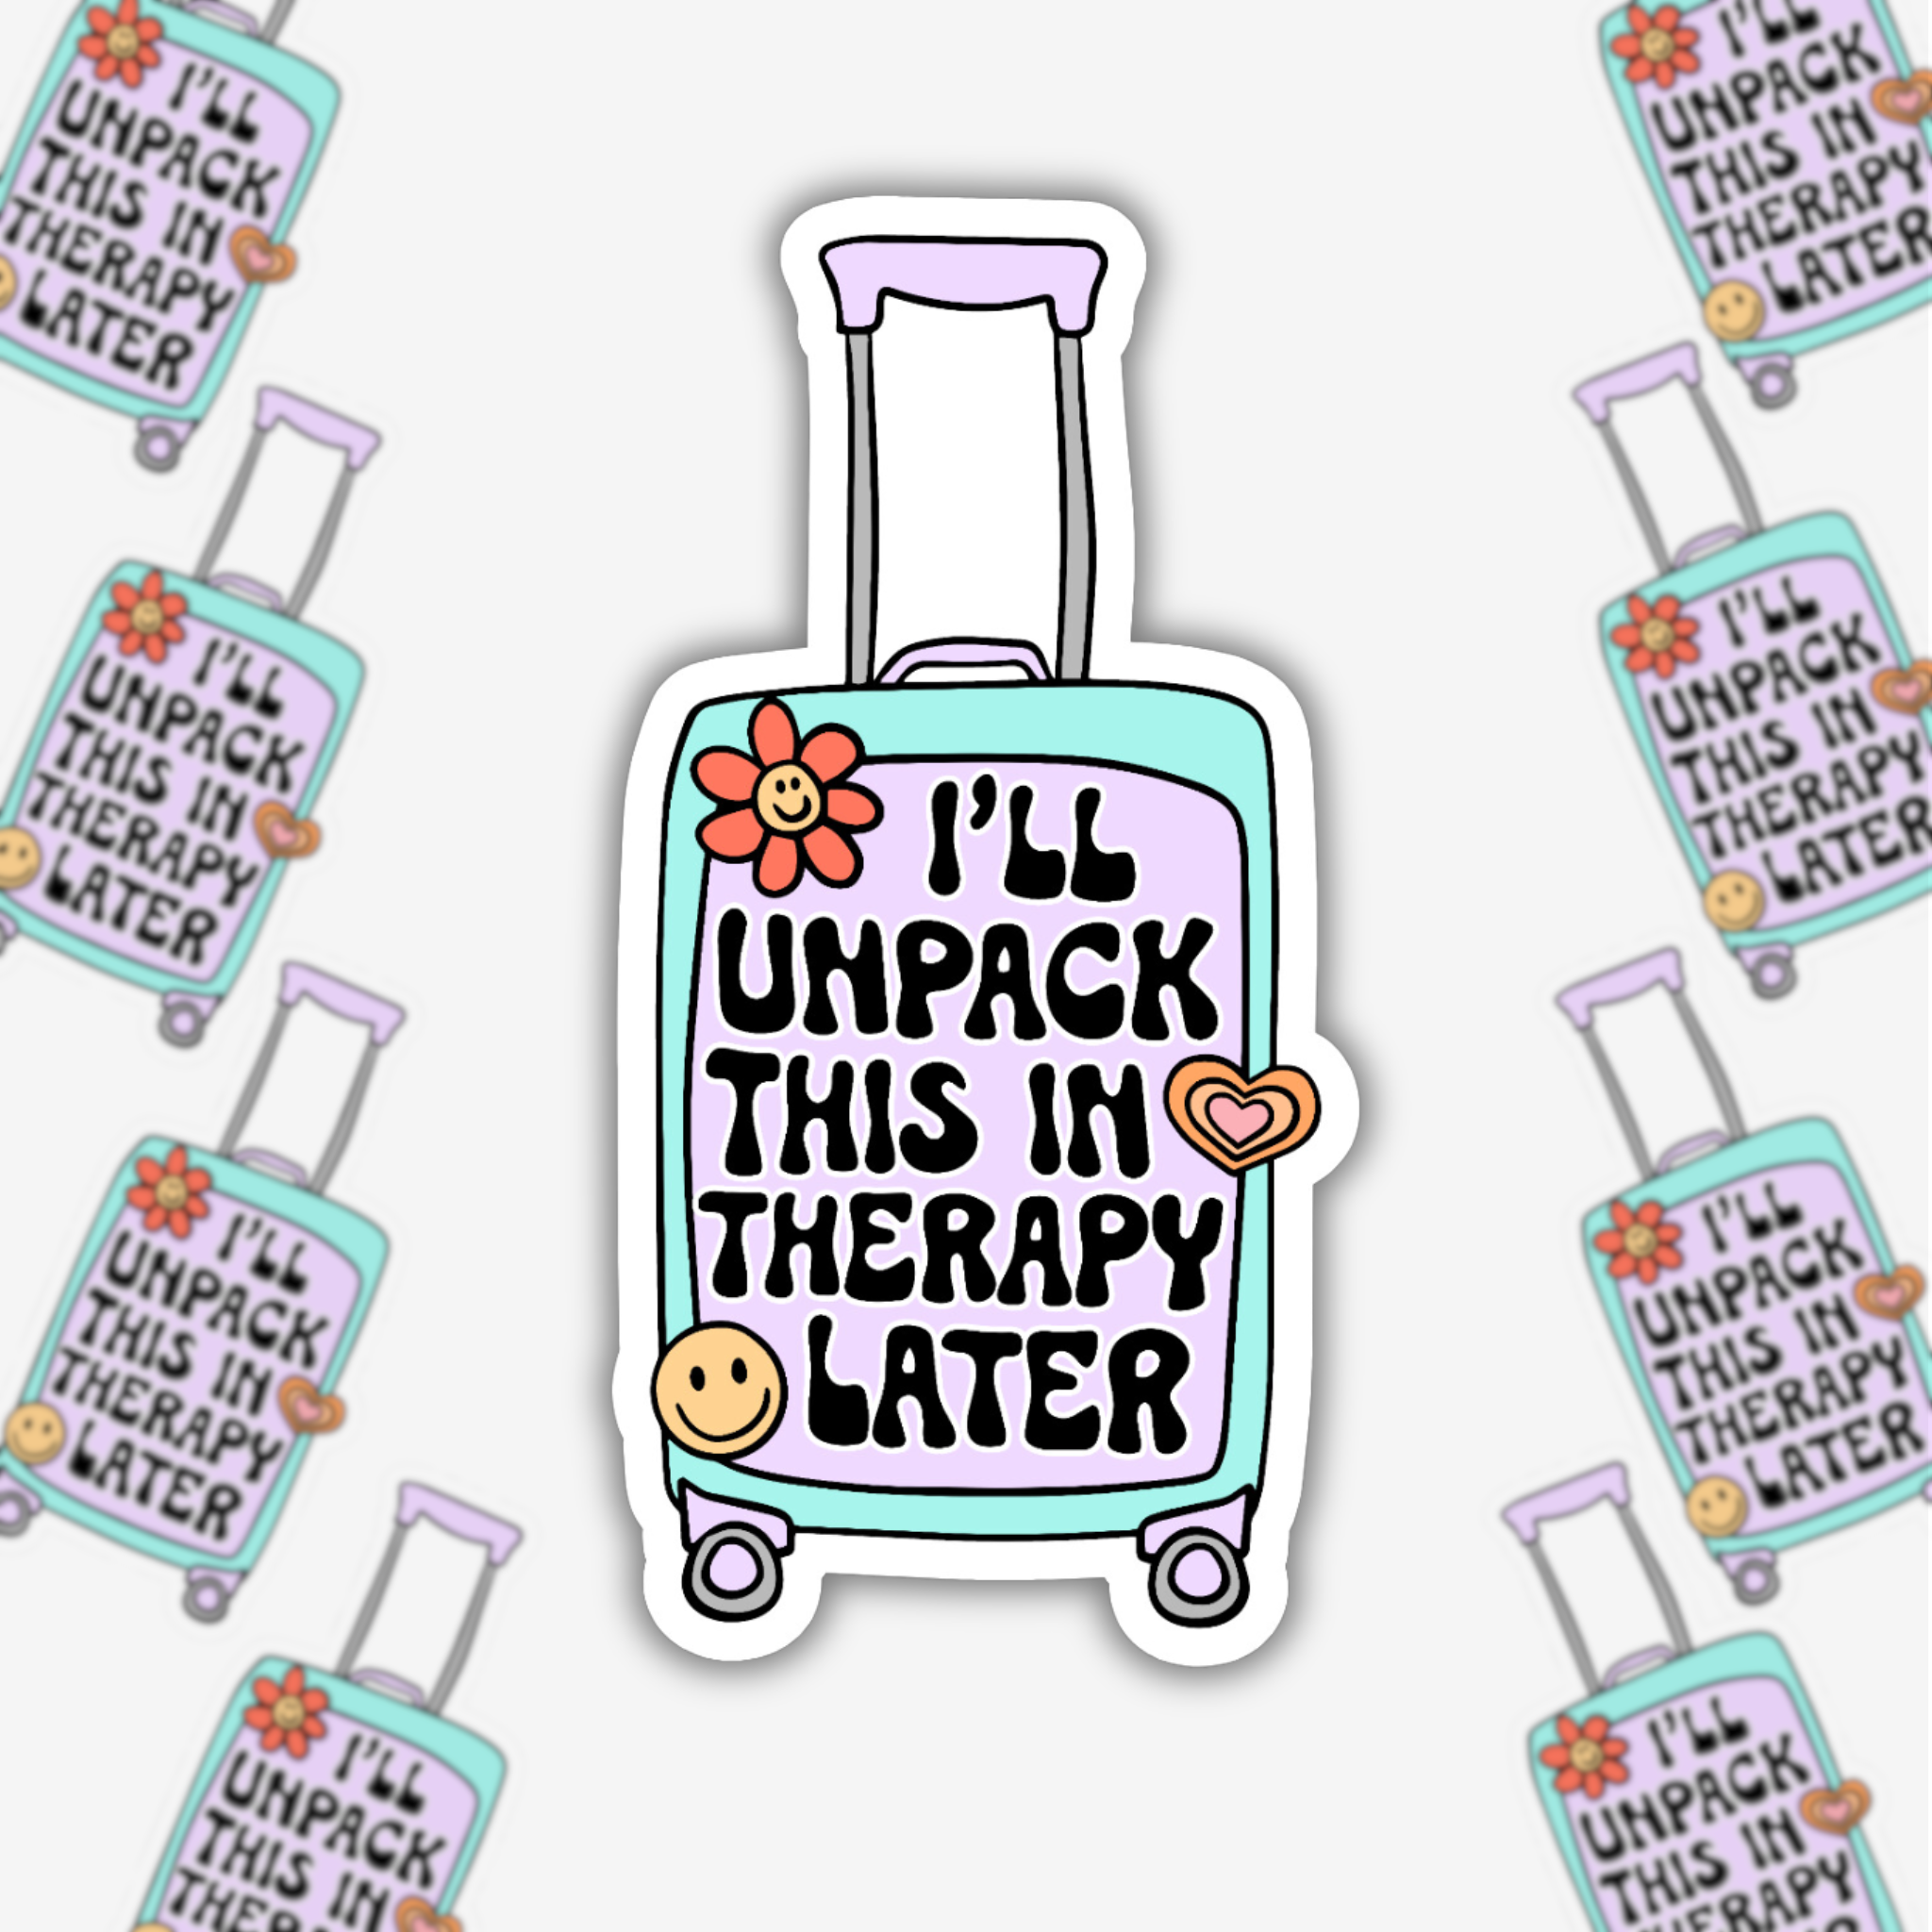 I'll Unpack This In Therapy Later Suitcase Sticker